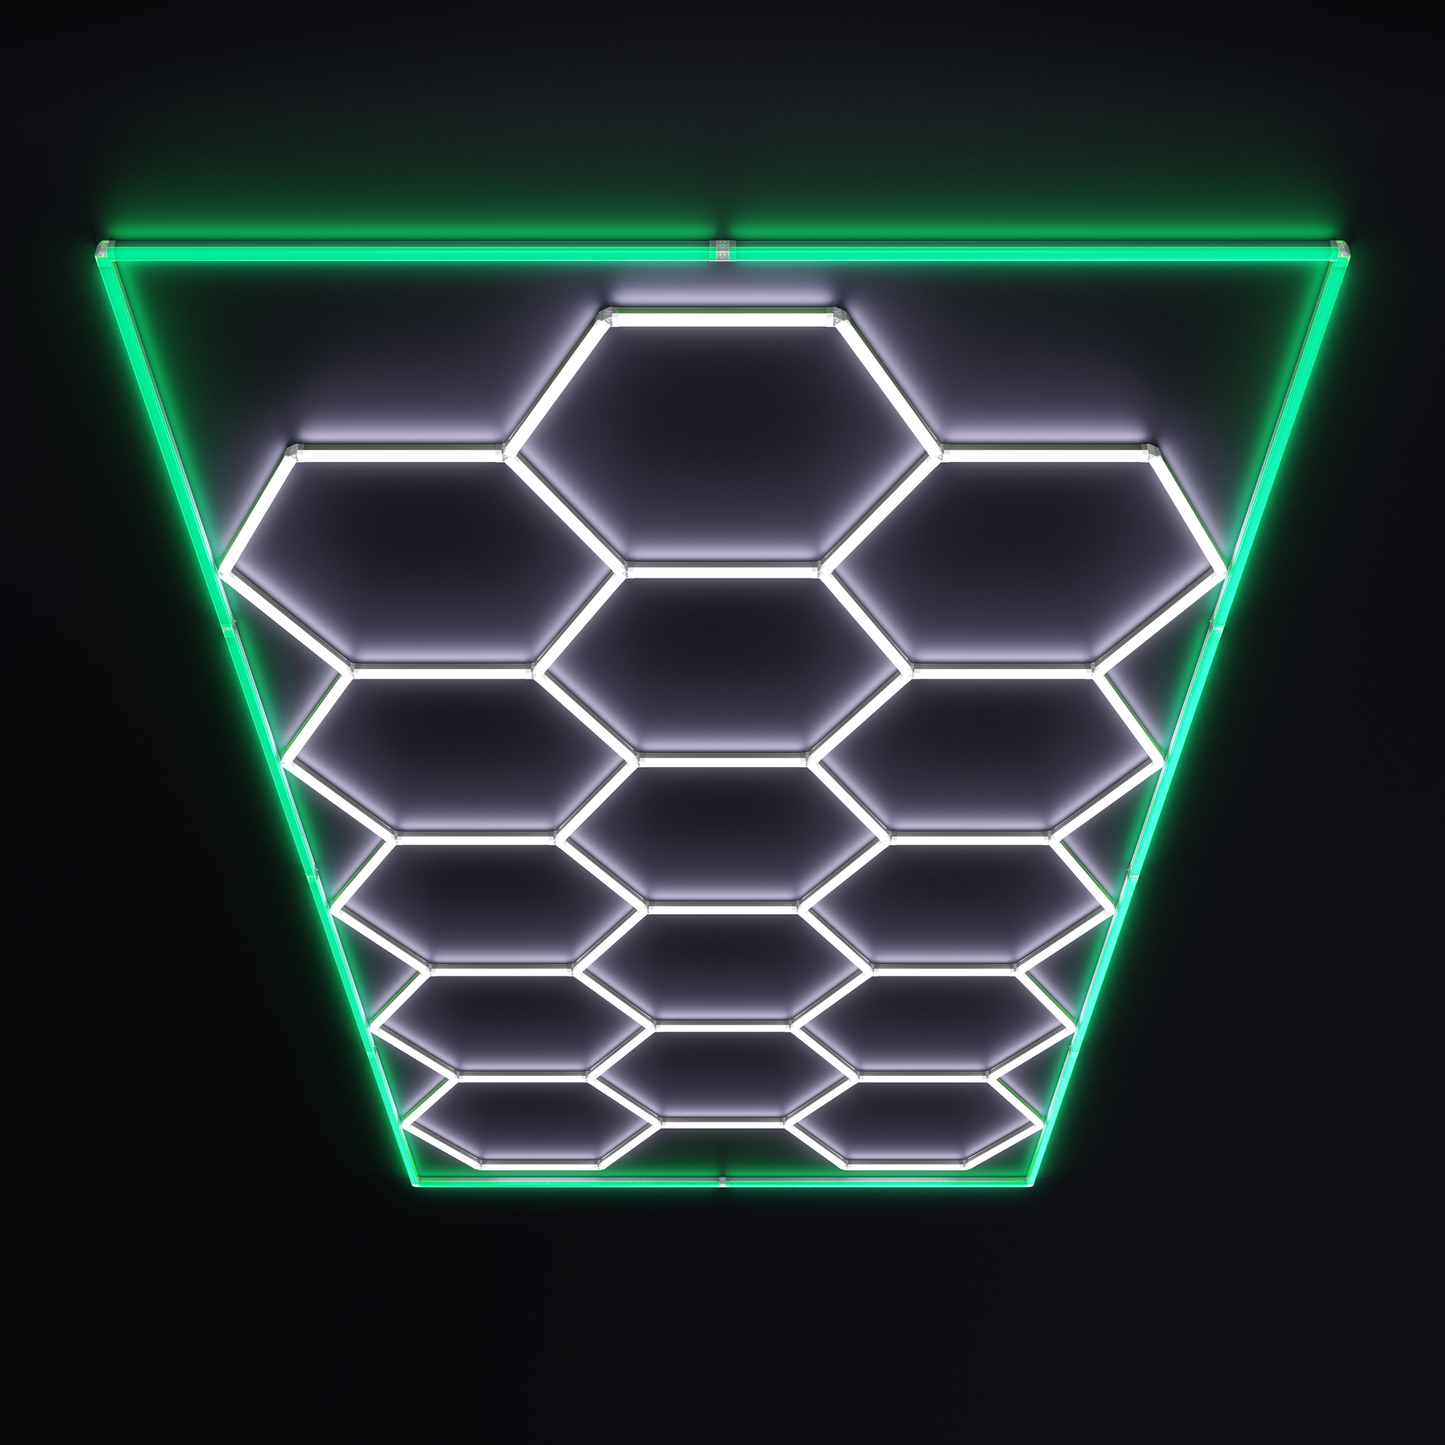 15 Hex Kit With Green Border (16’ x 8’)